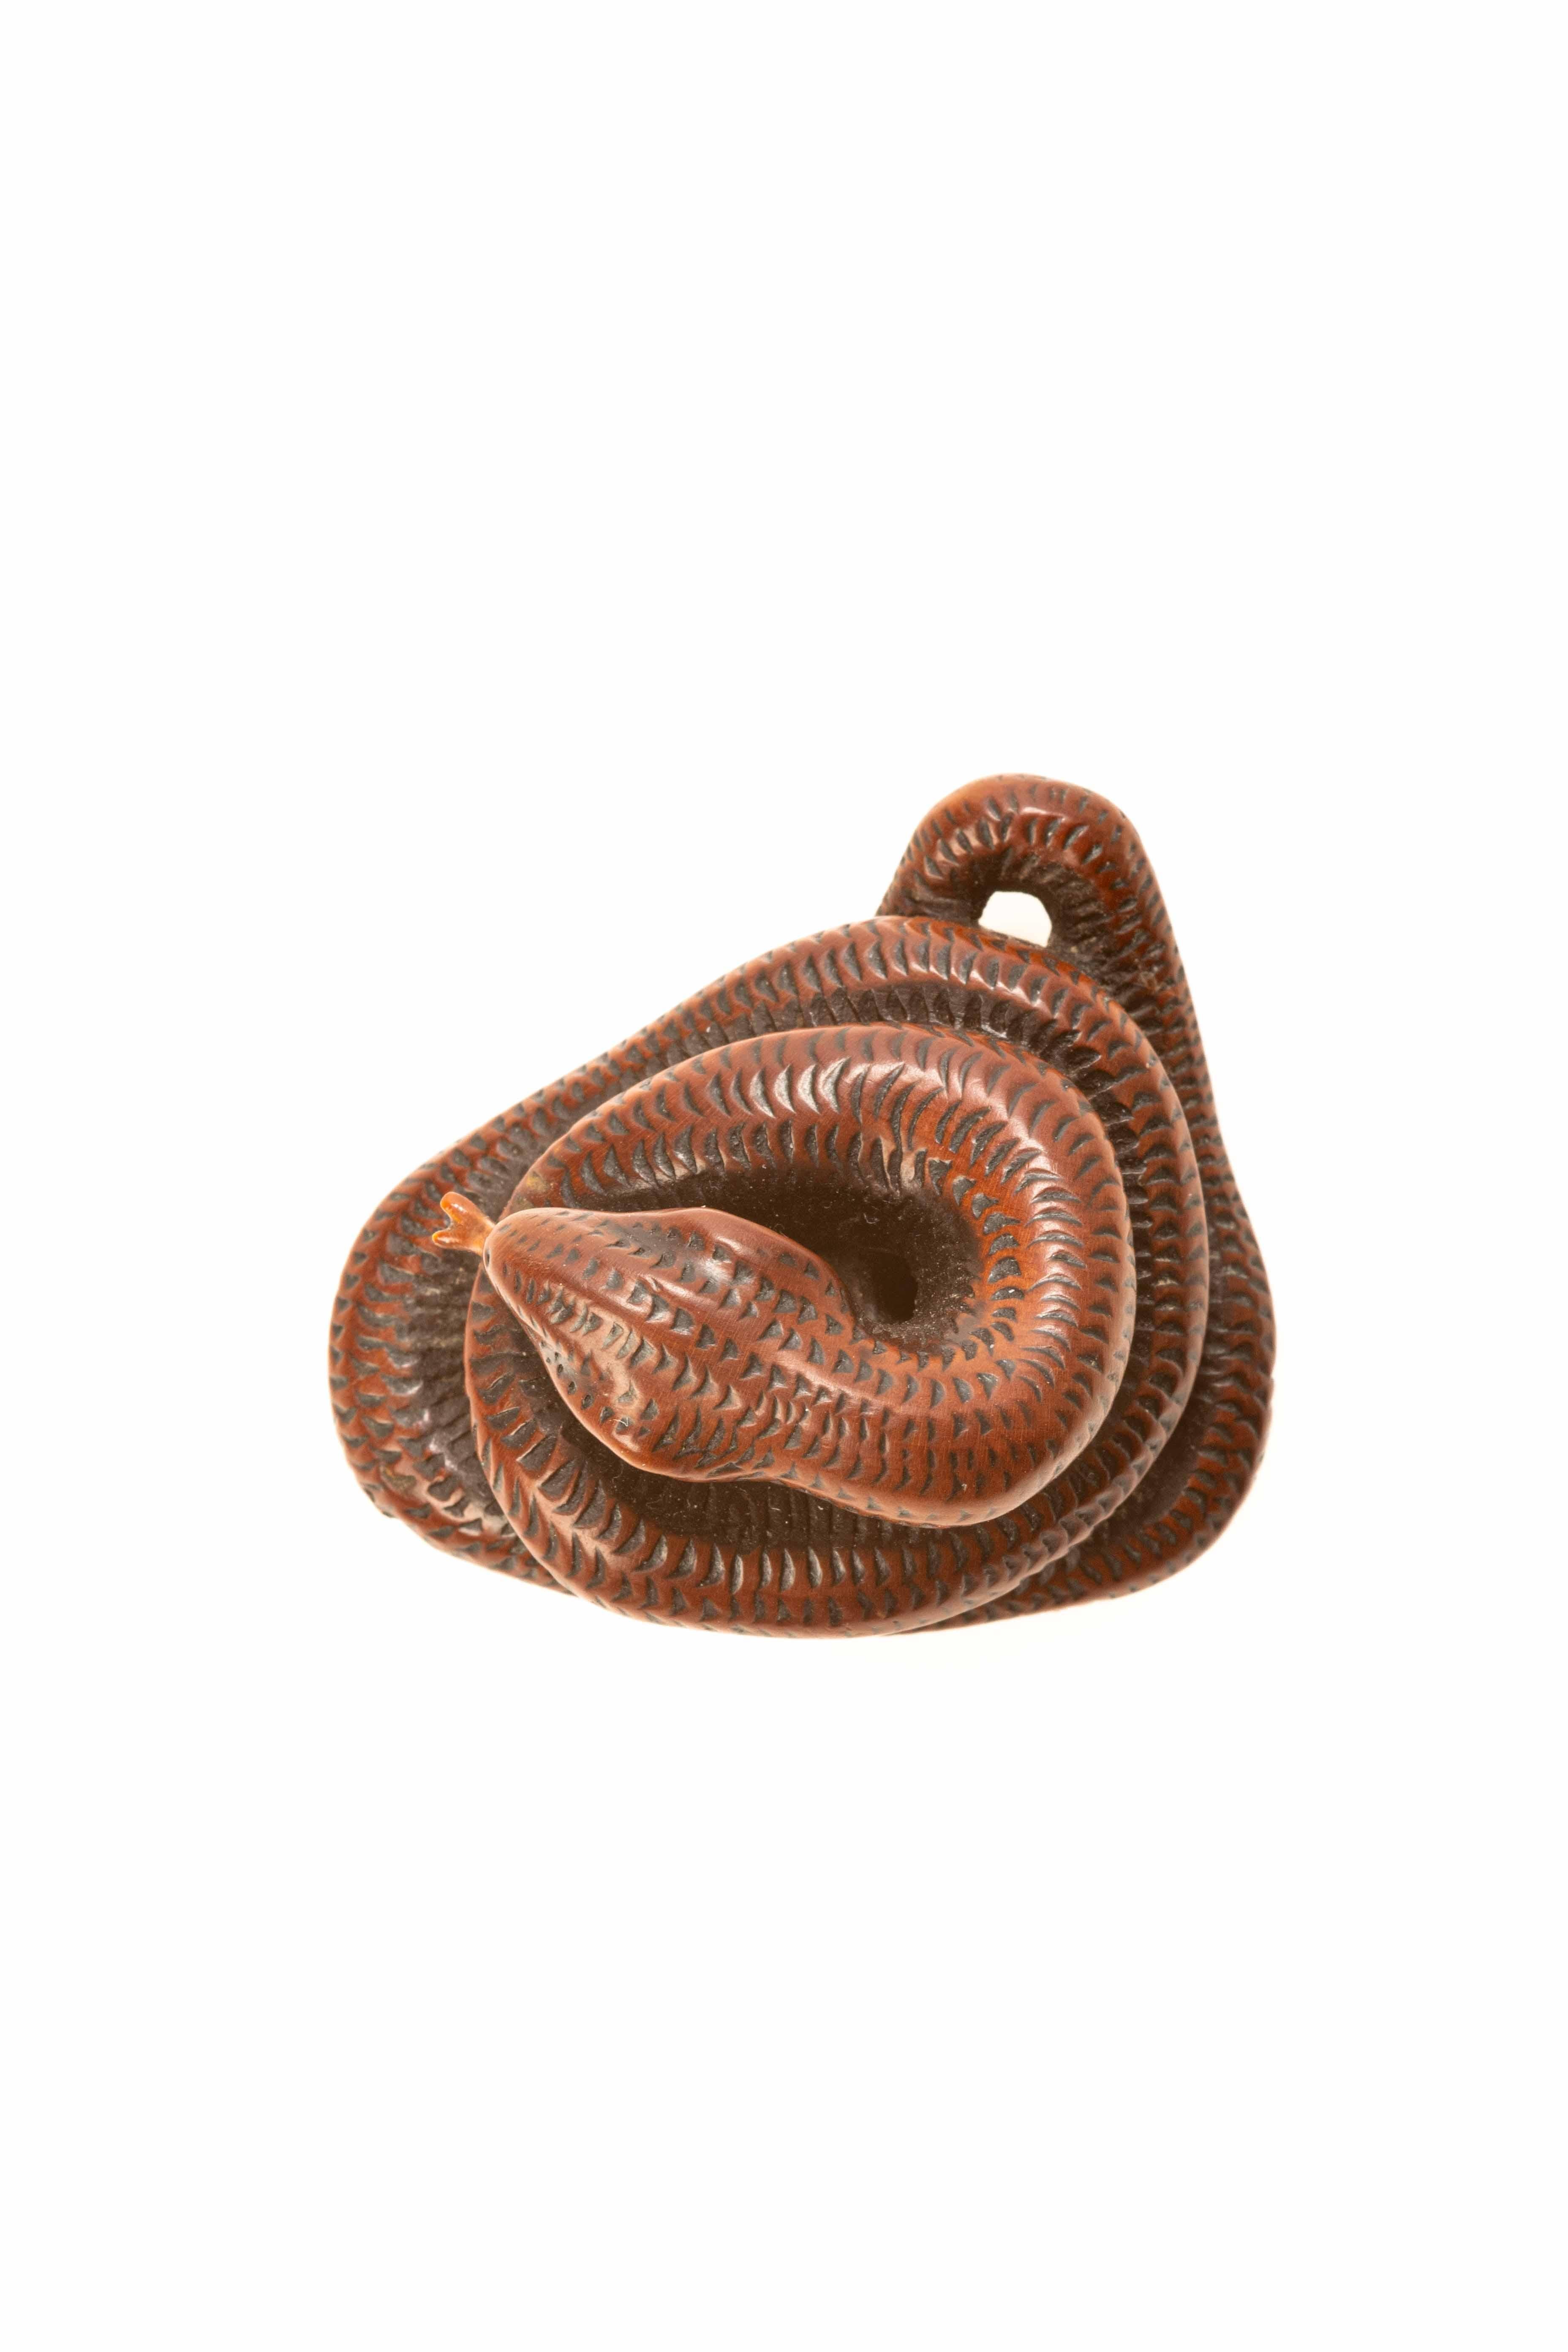 Carved A boxwood netsuke depicting a snake For Sale